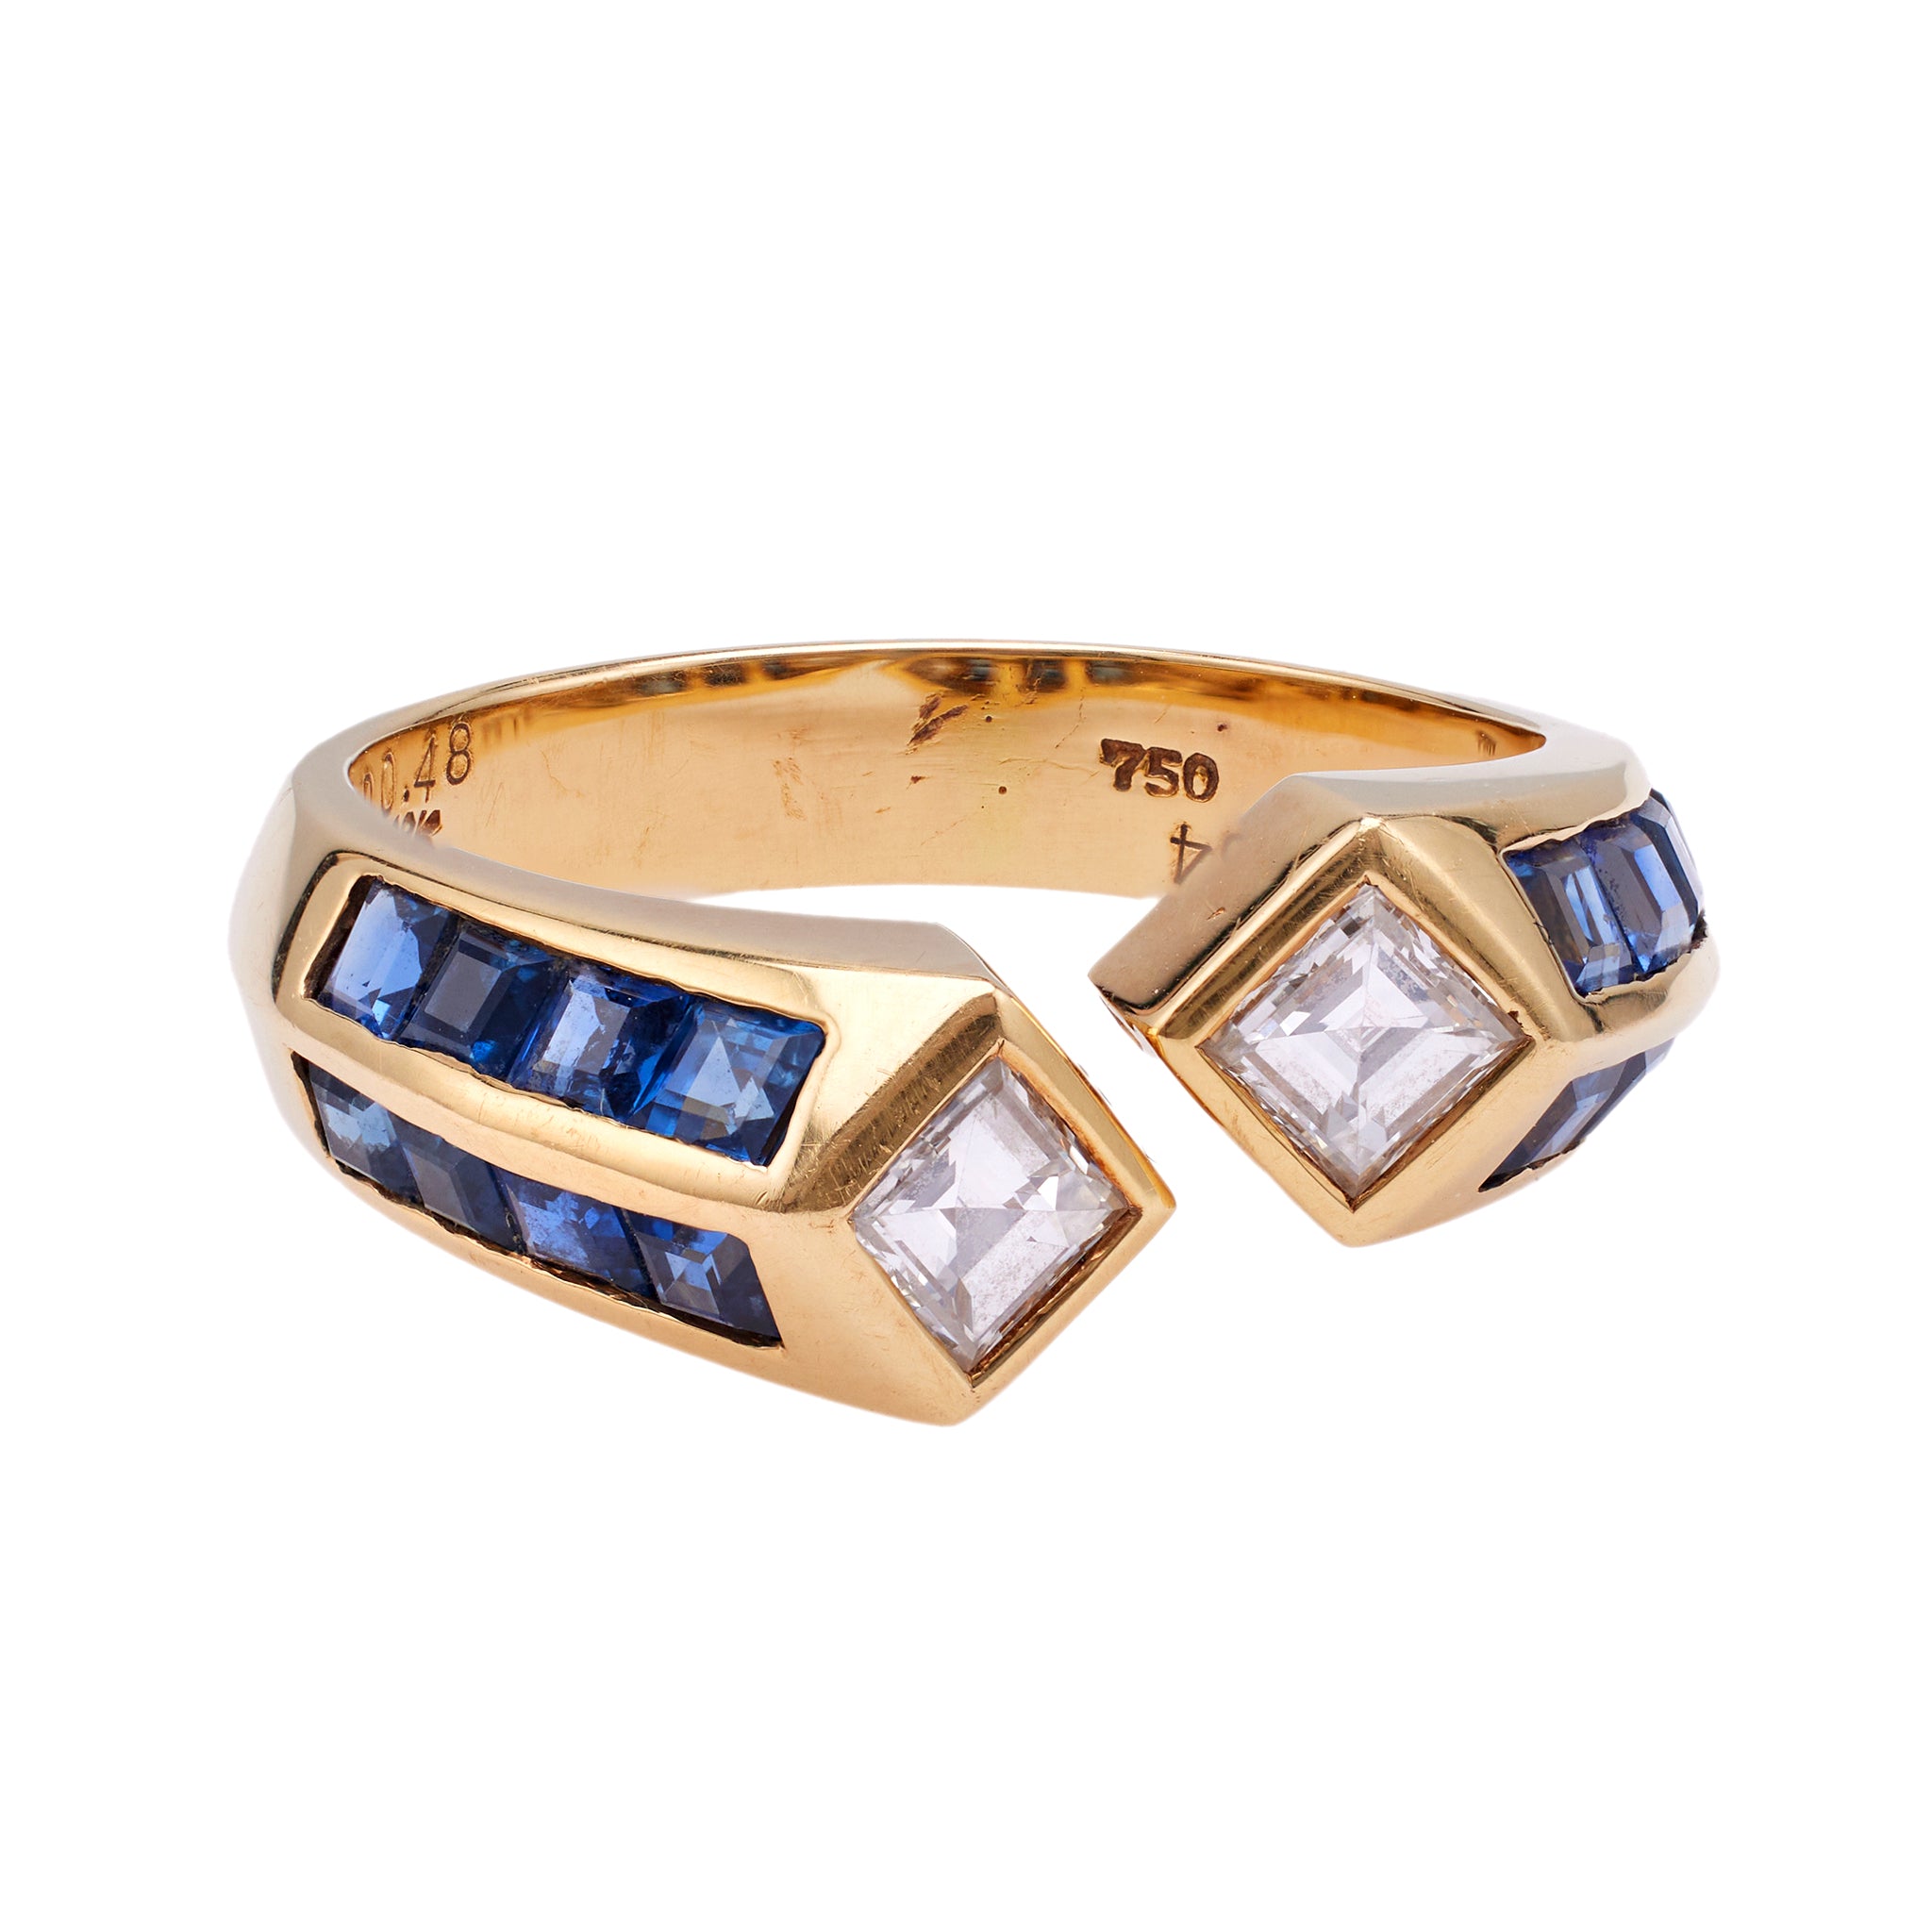 Vintage Diamond and Sapphire 18k Yellow Gold Ring Rings Jack Weir & Sons   